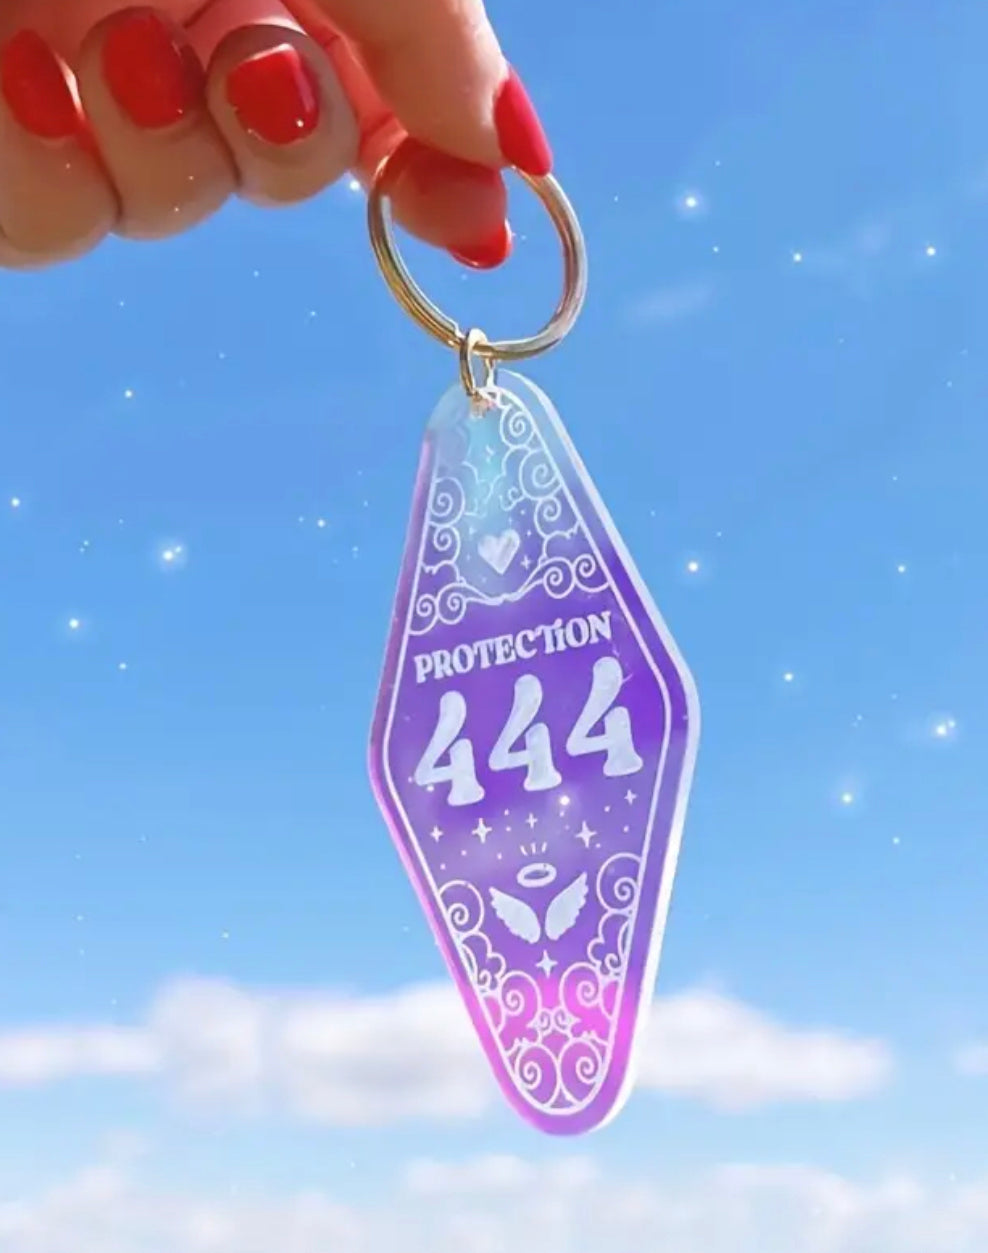 1pc Iridescent Acrylic Angel Number Motel Key Tag 1111 222 444 777 888 - Manifest Protection Balance Lucky Alignment - Aura Holographic Keychain